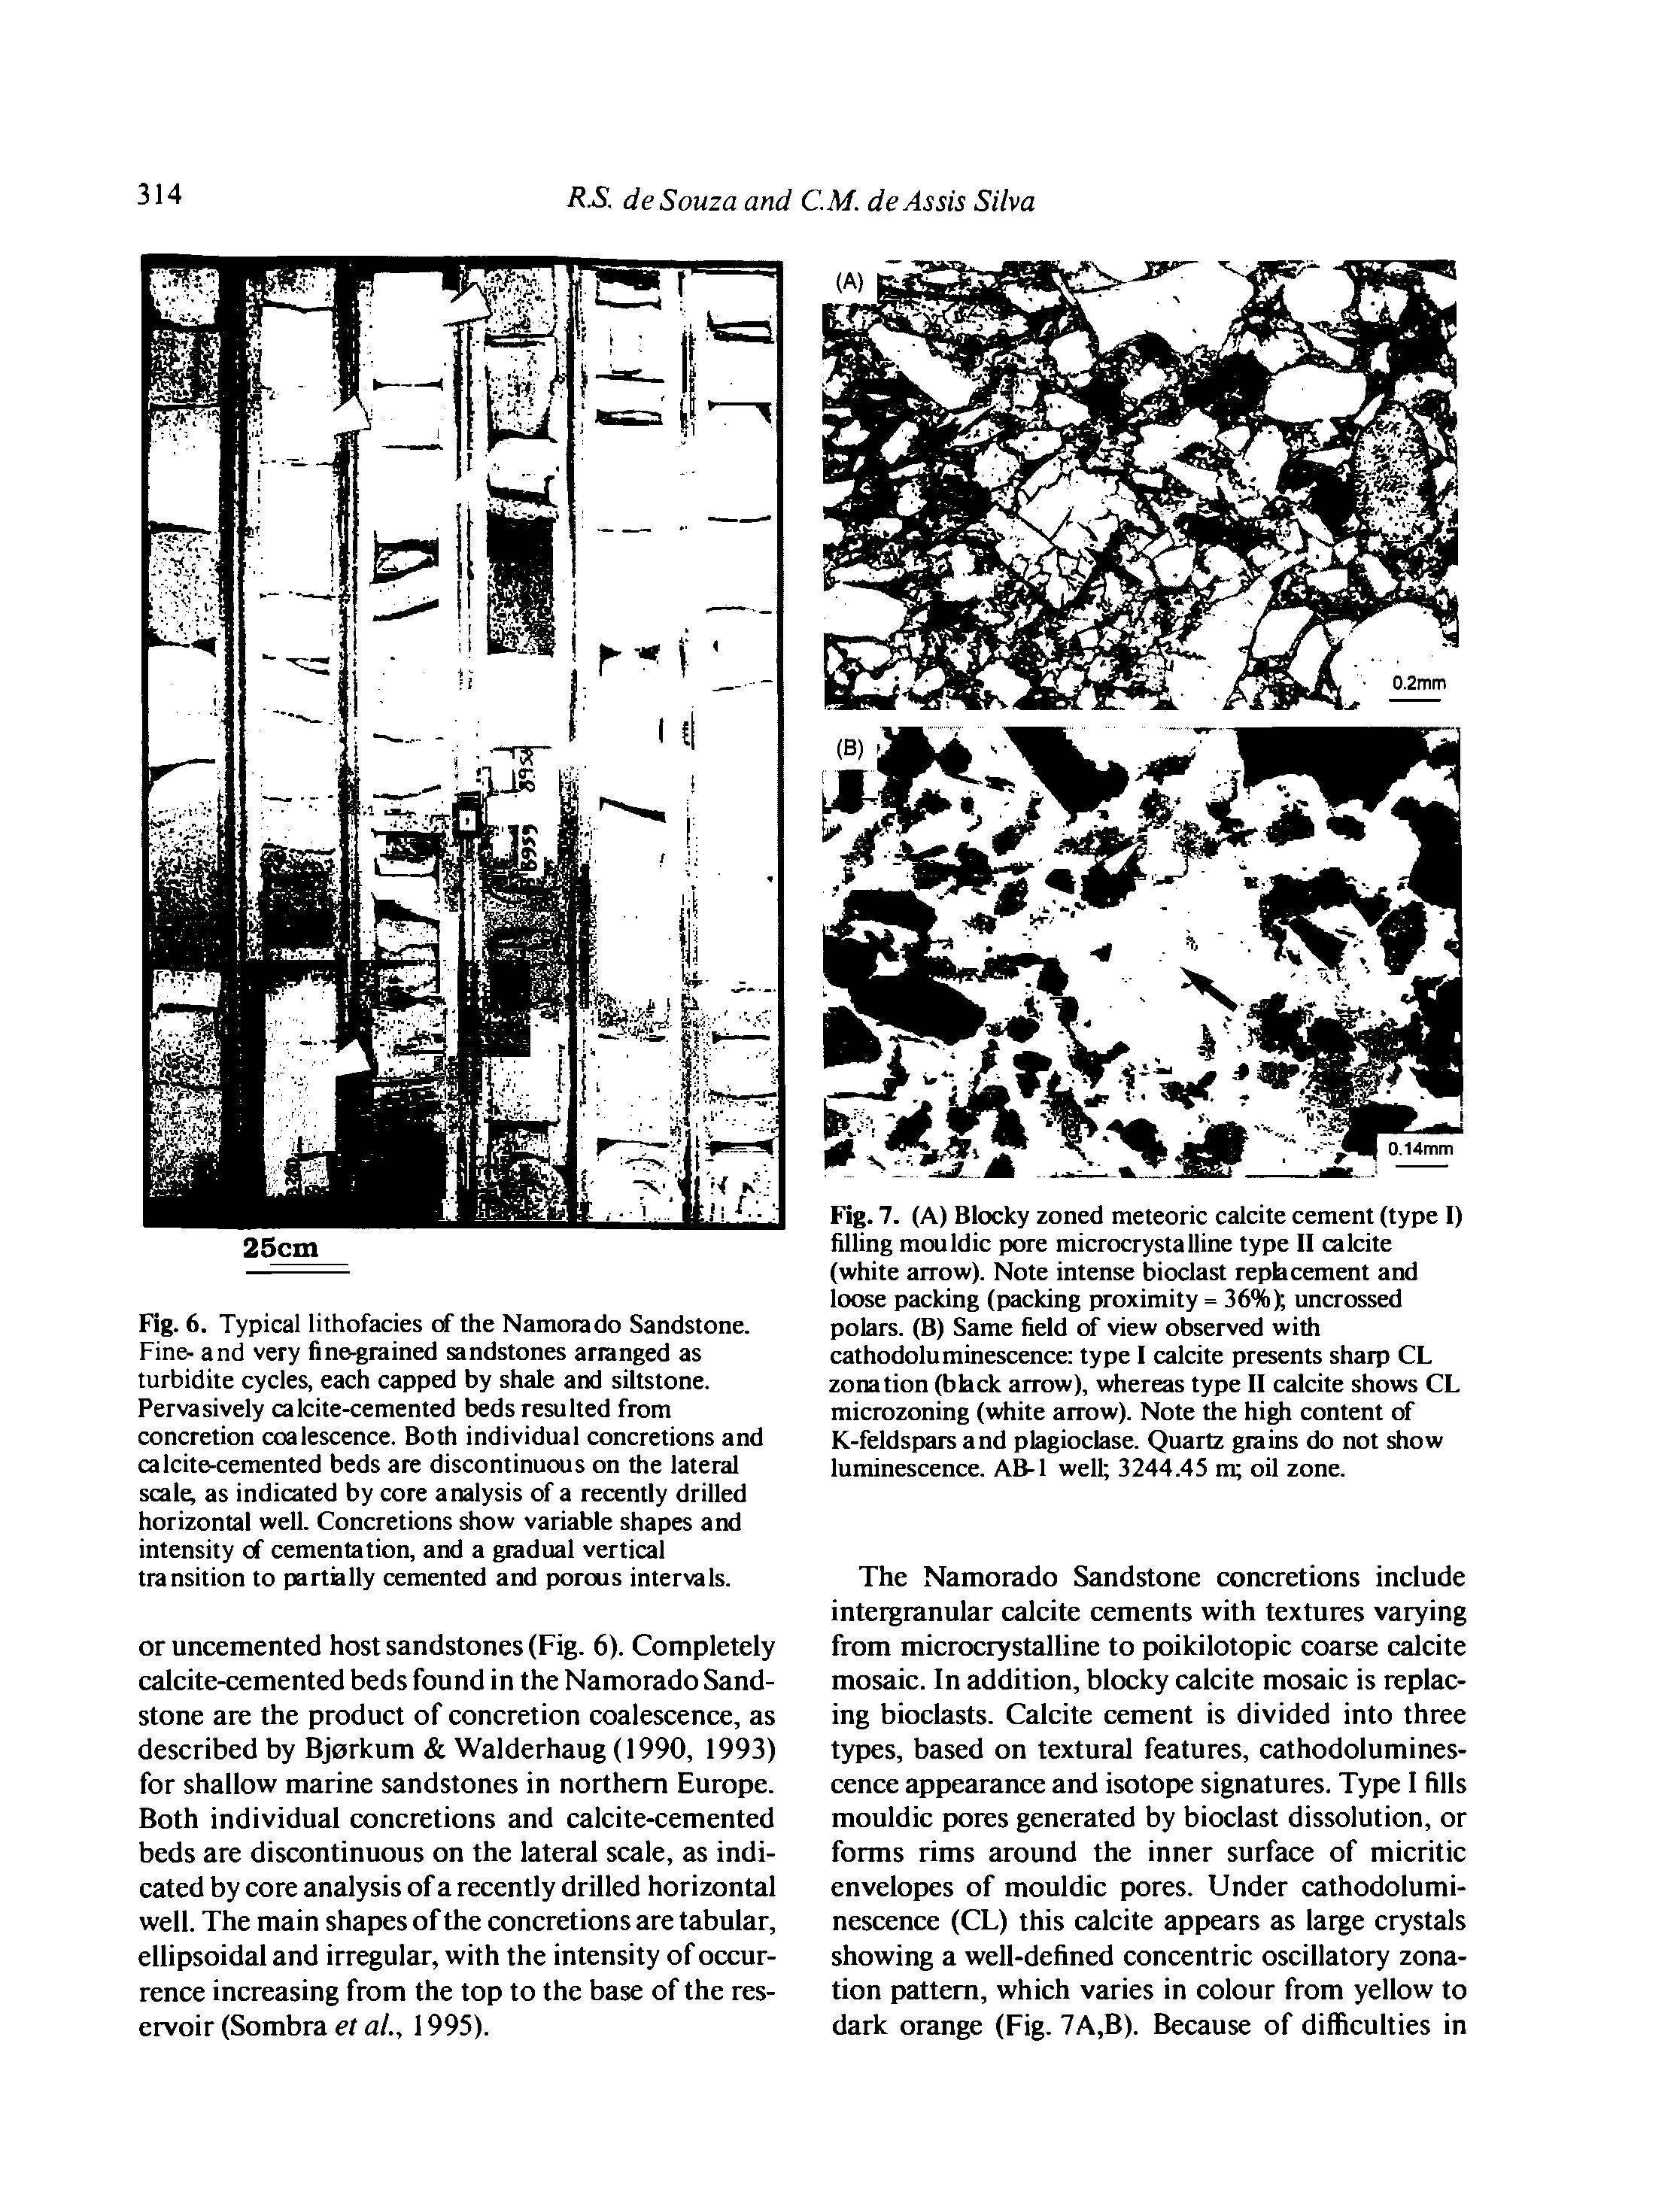 Fig. 6. Typical lithofacies of the Namorado Sandstone. Fine- and very fine.grained sandstones arranged as turbidite cycles, each capped by shale and siltstone. Pervasively calcite-cemented beds resulted from concretion coalescence. Both individual concretions and calcite-cemented beds are discontinuous on the lateral scale as indicated by core analysis of a recently drilled horizontal well. Concretions show variable shapes and intensity of cementation, and a gradual vertical transition to partially cemented and porous intervals.